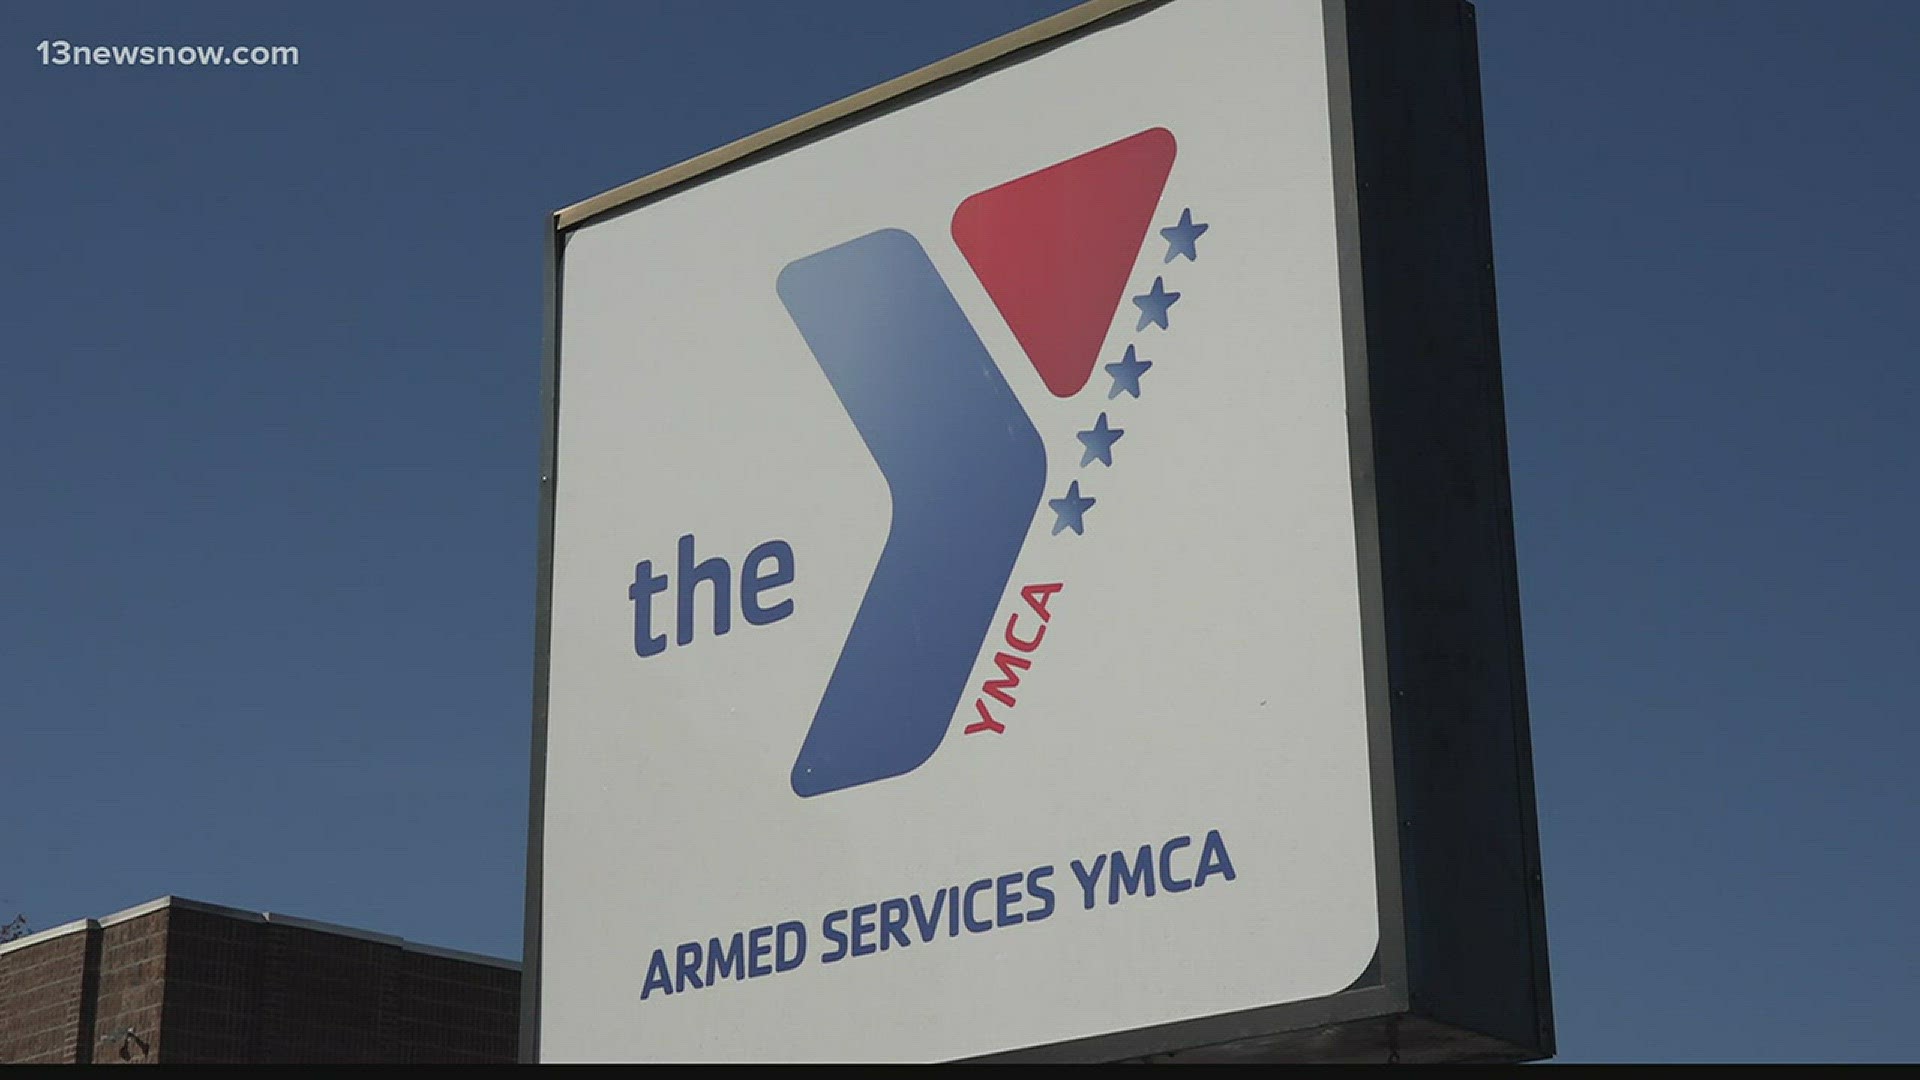 The Armed Forces YMCA gives to a special group of military personnel throughout the year and they're asking the public to kick in on Giving Tuesday.